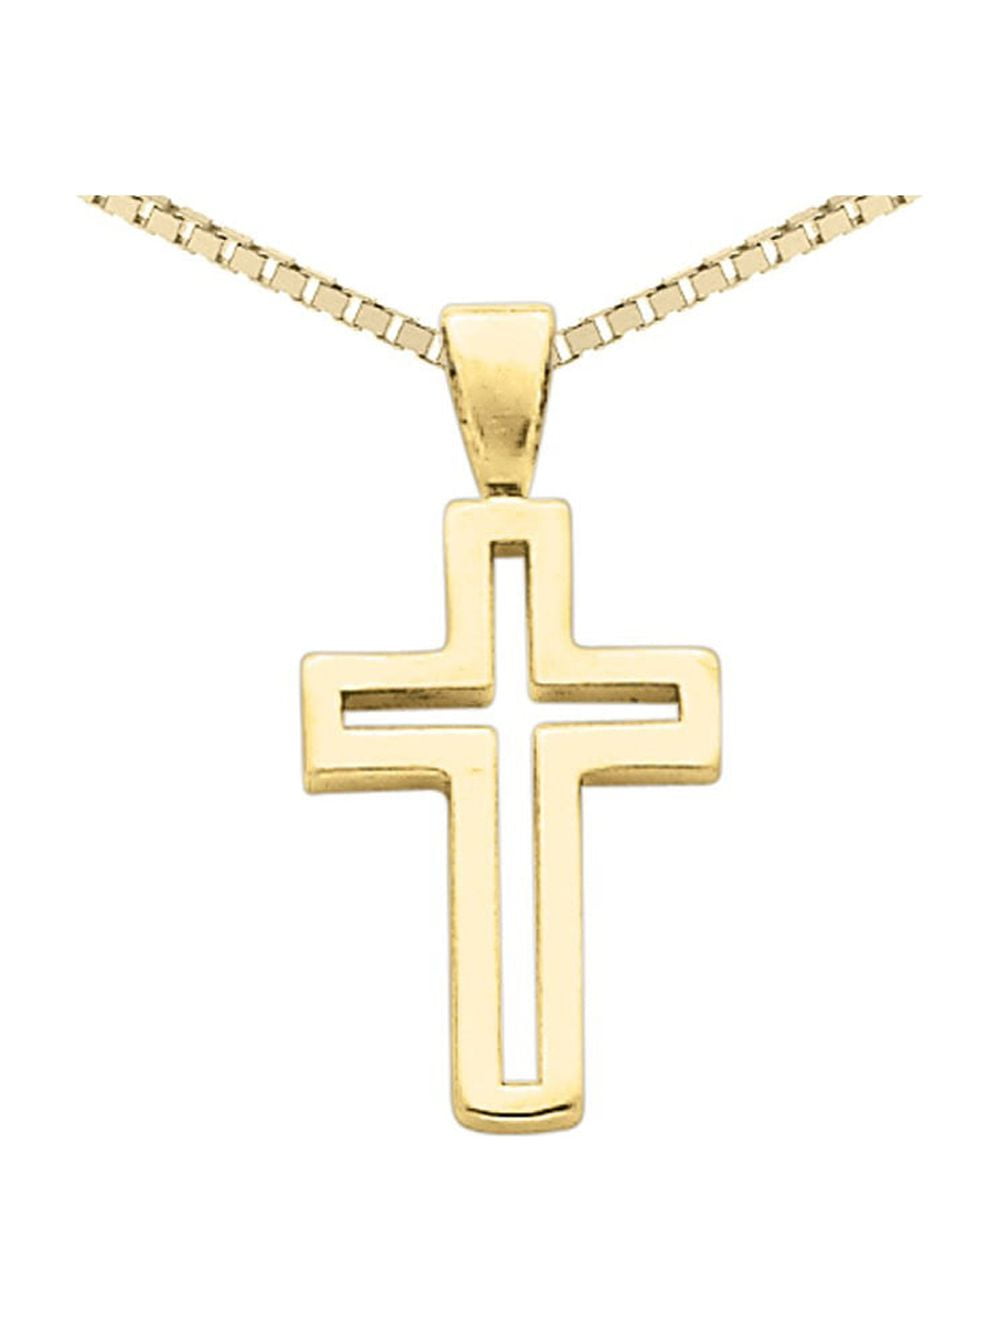 APSVO Gold Cross Necklace for Men Boys Bible Verse Stainless Steel Cross  Pendant Chain American Flag Necklaces Religious Christian Jewelry Gifts -  Walmart.com